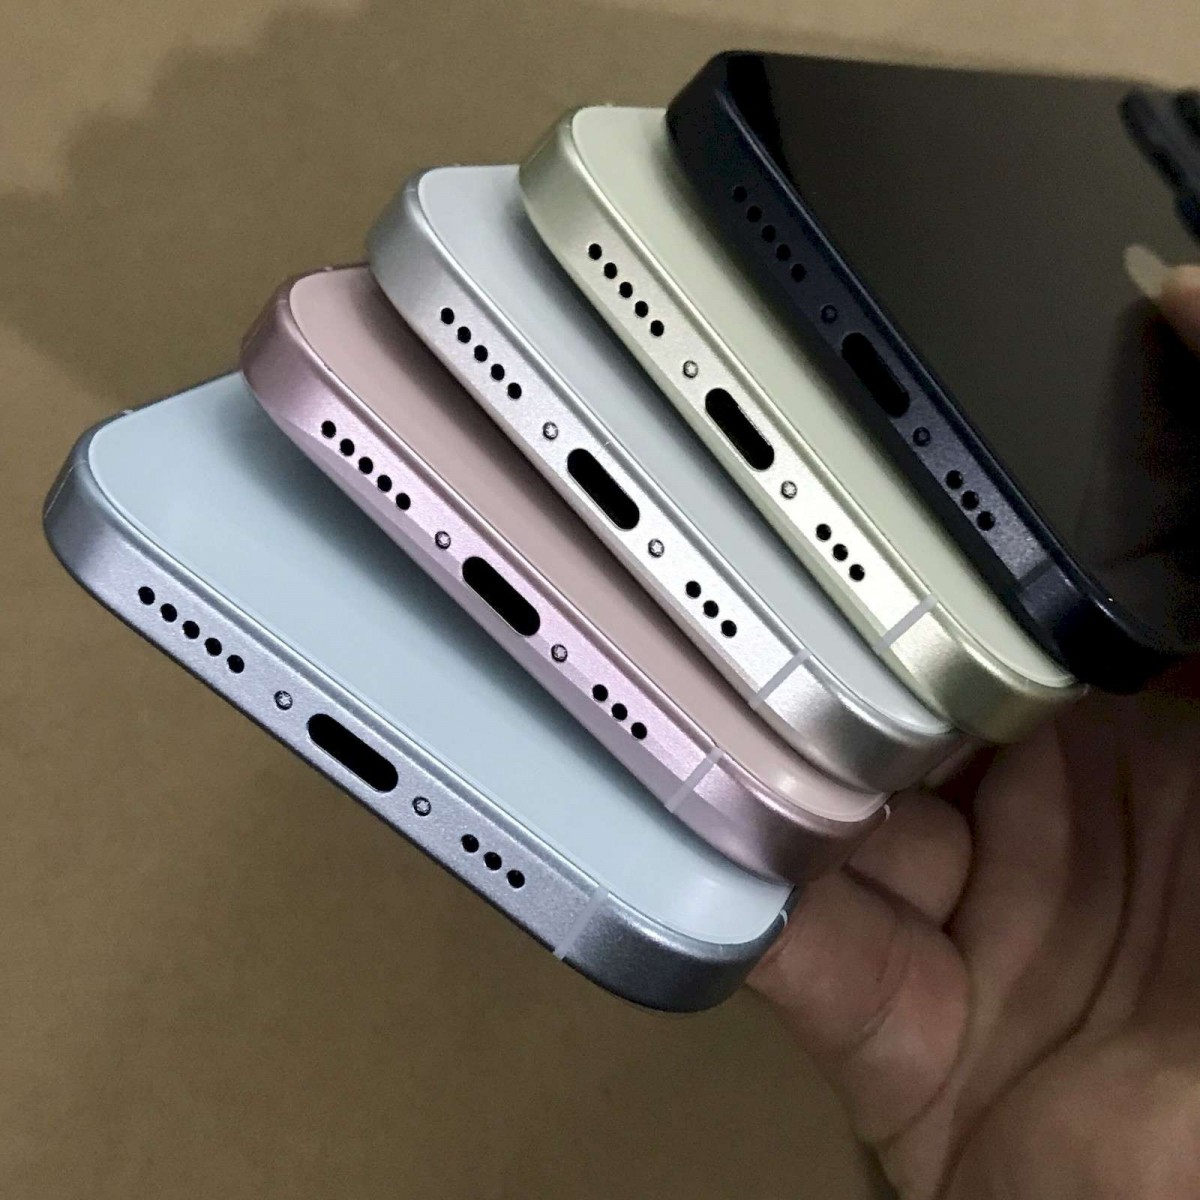 Apple iPhone 15 Pro and 15 Pro Max - what to expect?